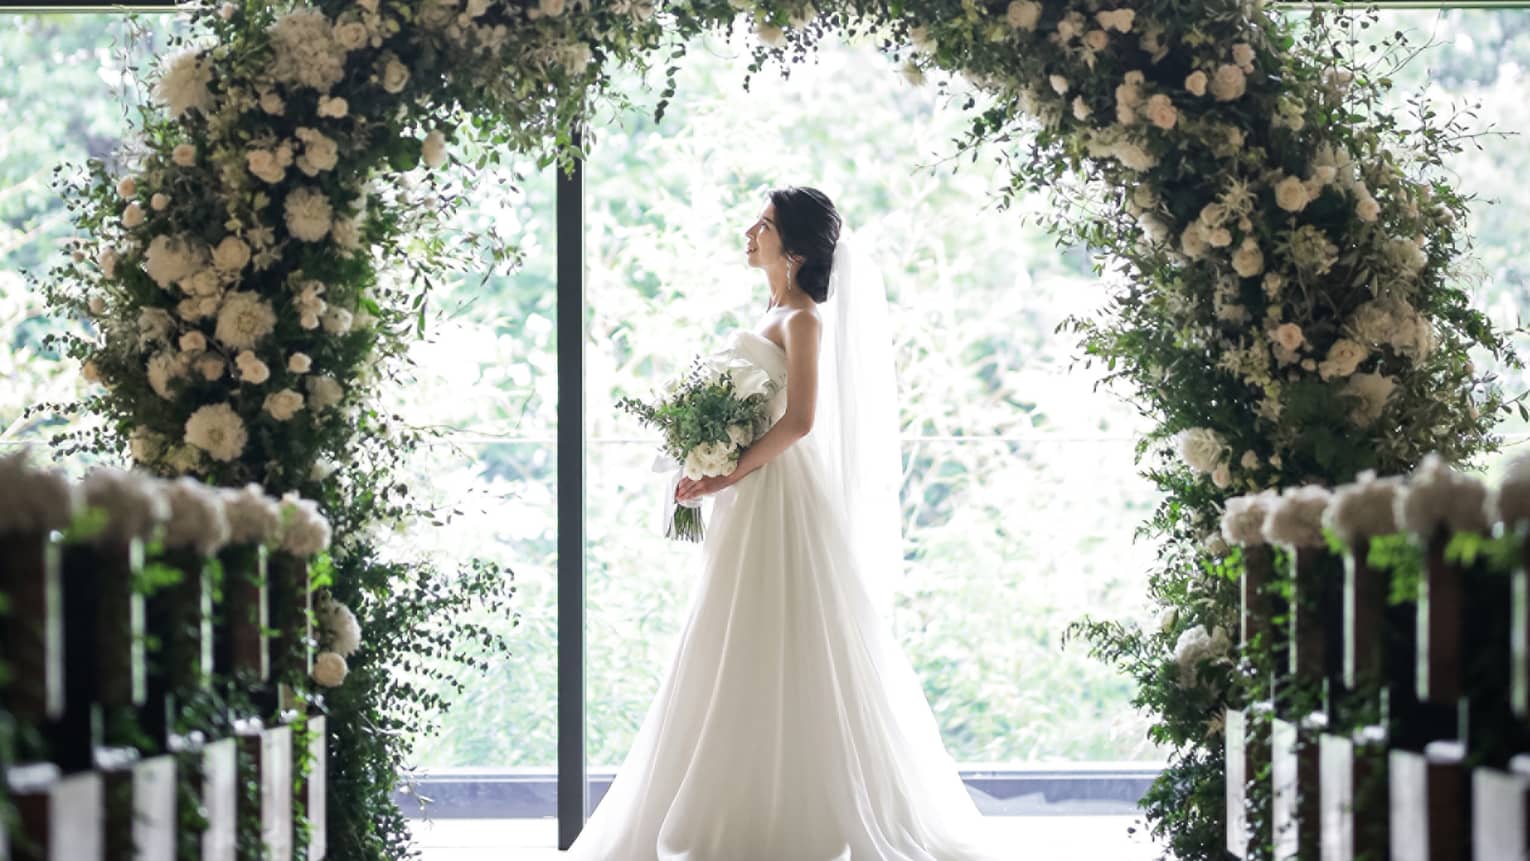 Bride stands under round wedding altar covered in white flowers by sunny window